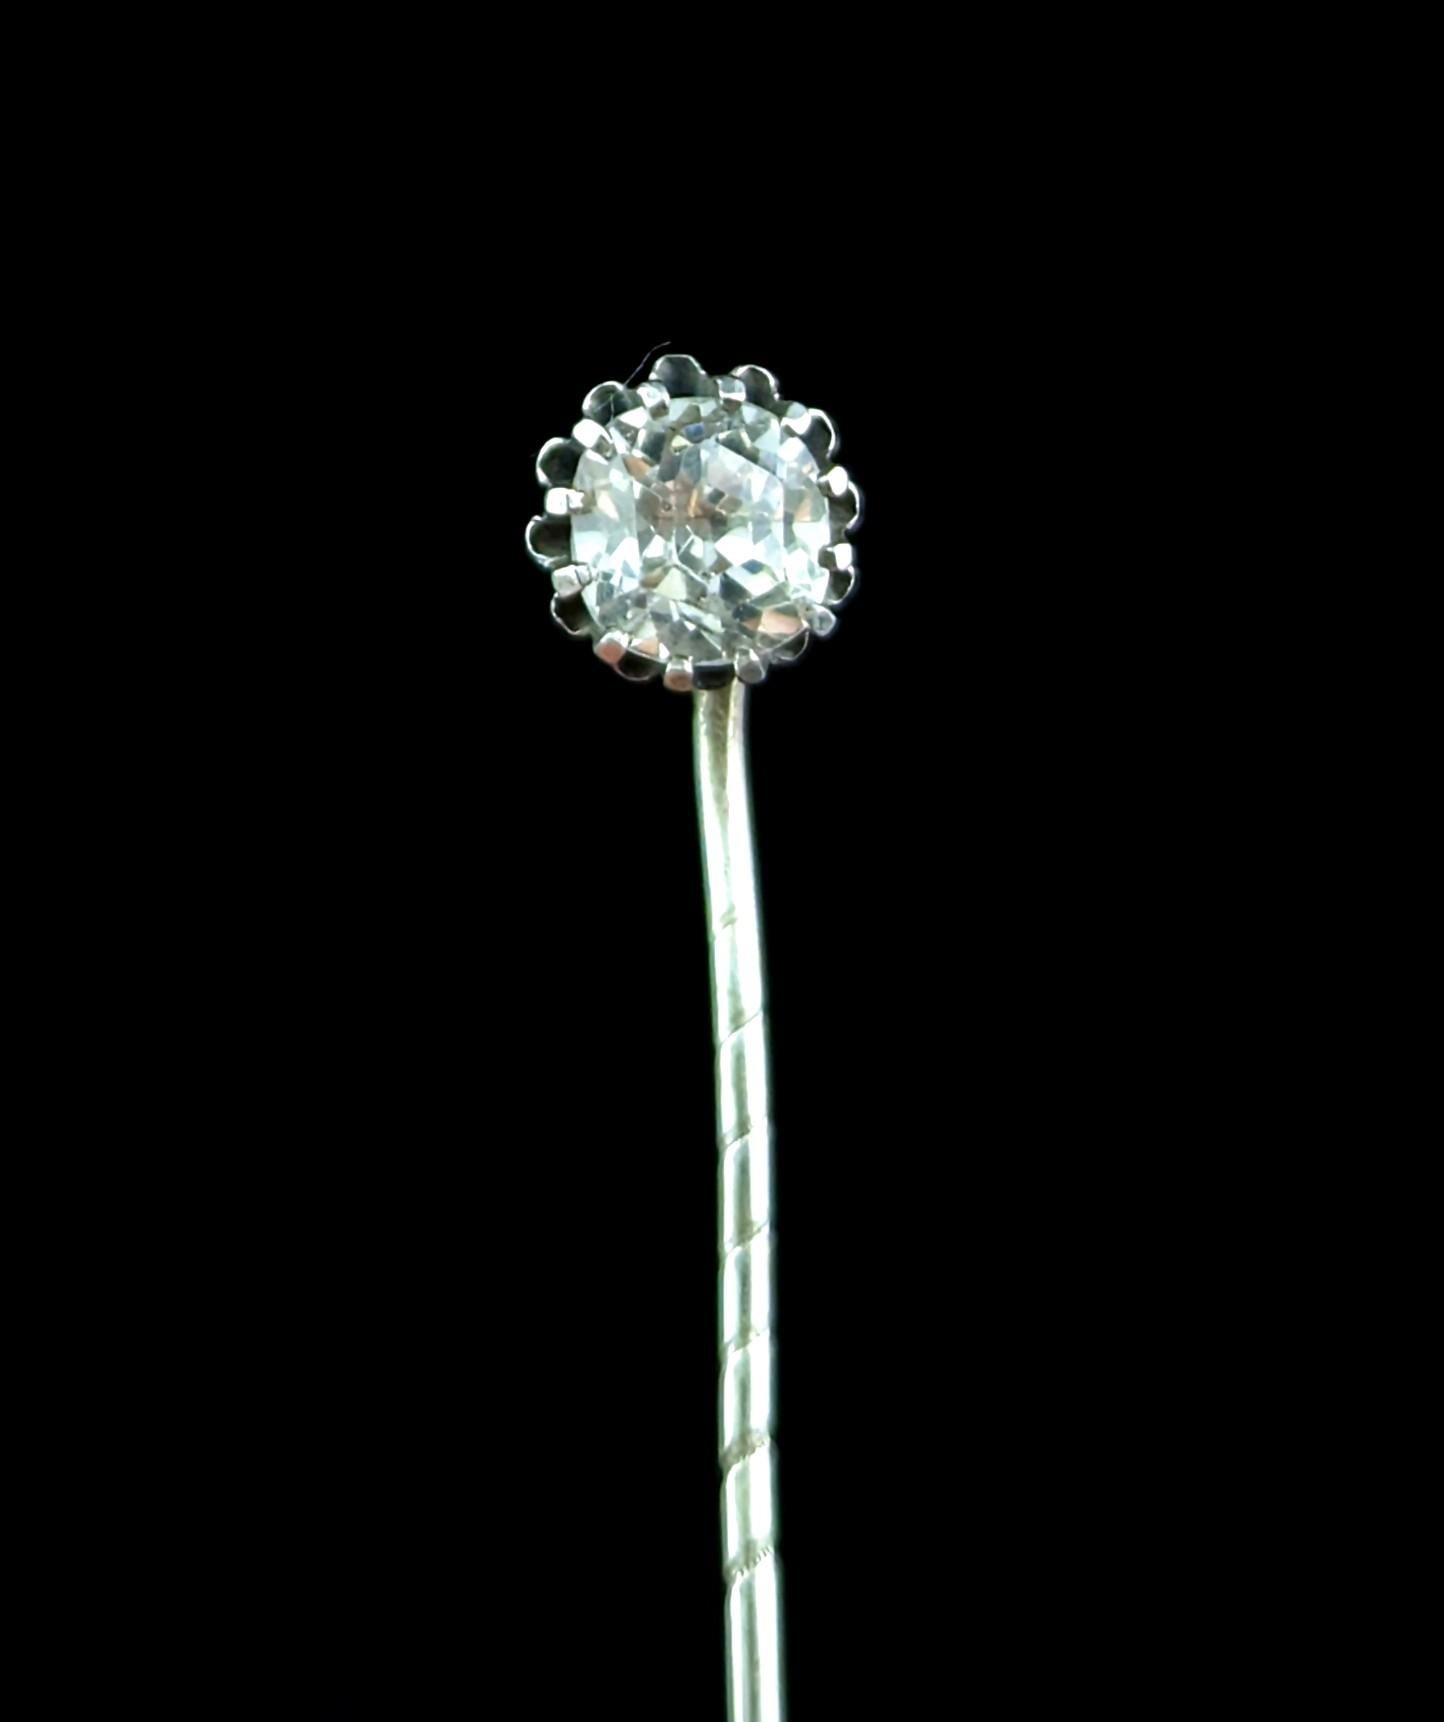 This late Georgian silver and paste stick pin can be imagined adorning a fine gentleman's cravat.

Made from sterling silver the finial golds a single sparkling clear paste stone.

The stick pin also known as a tie or cravat pin started out its